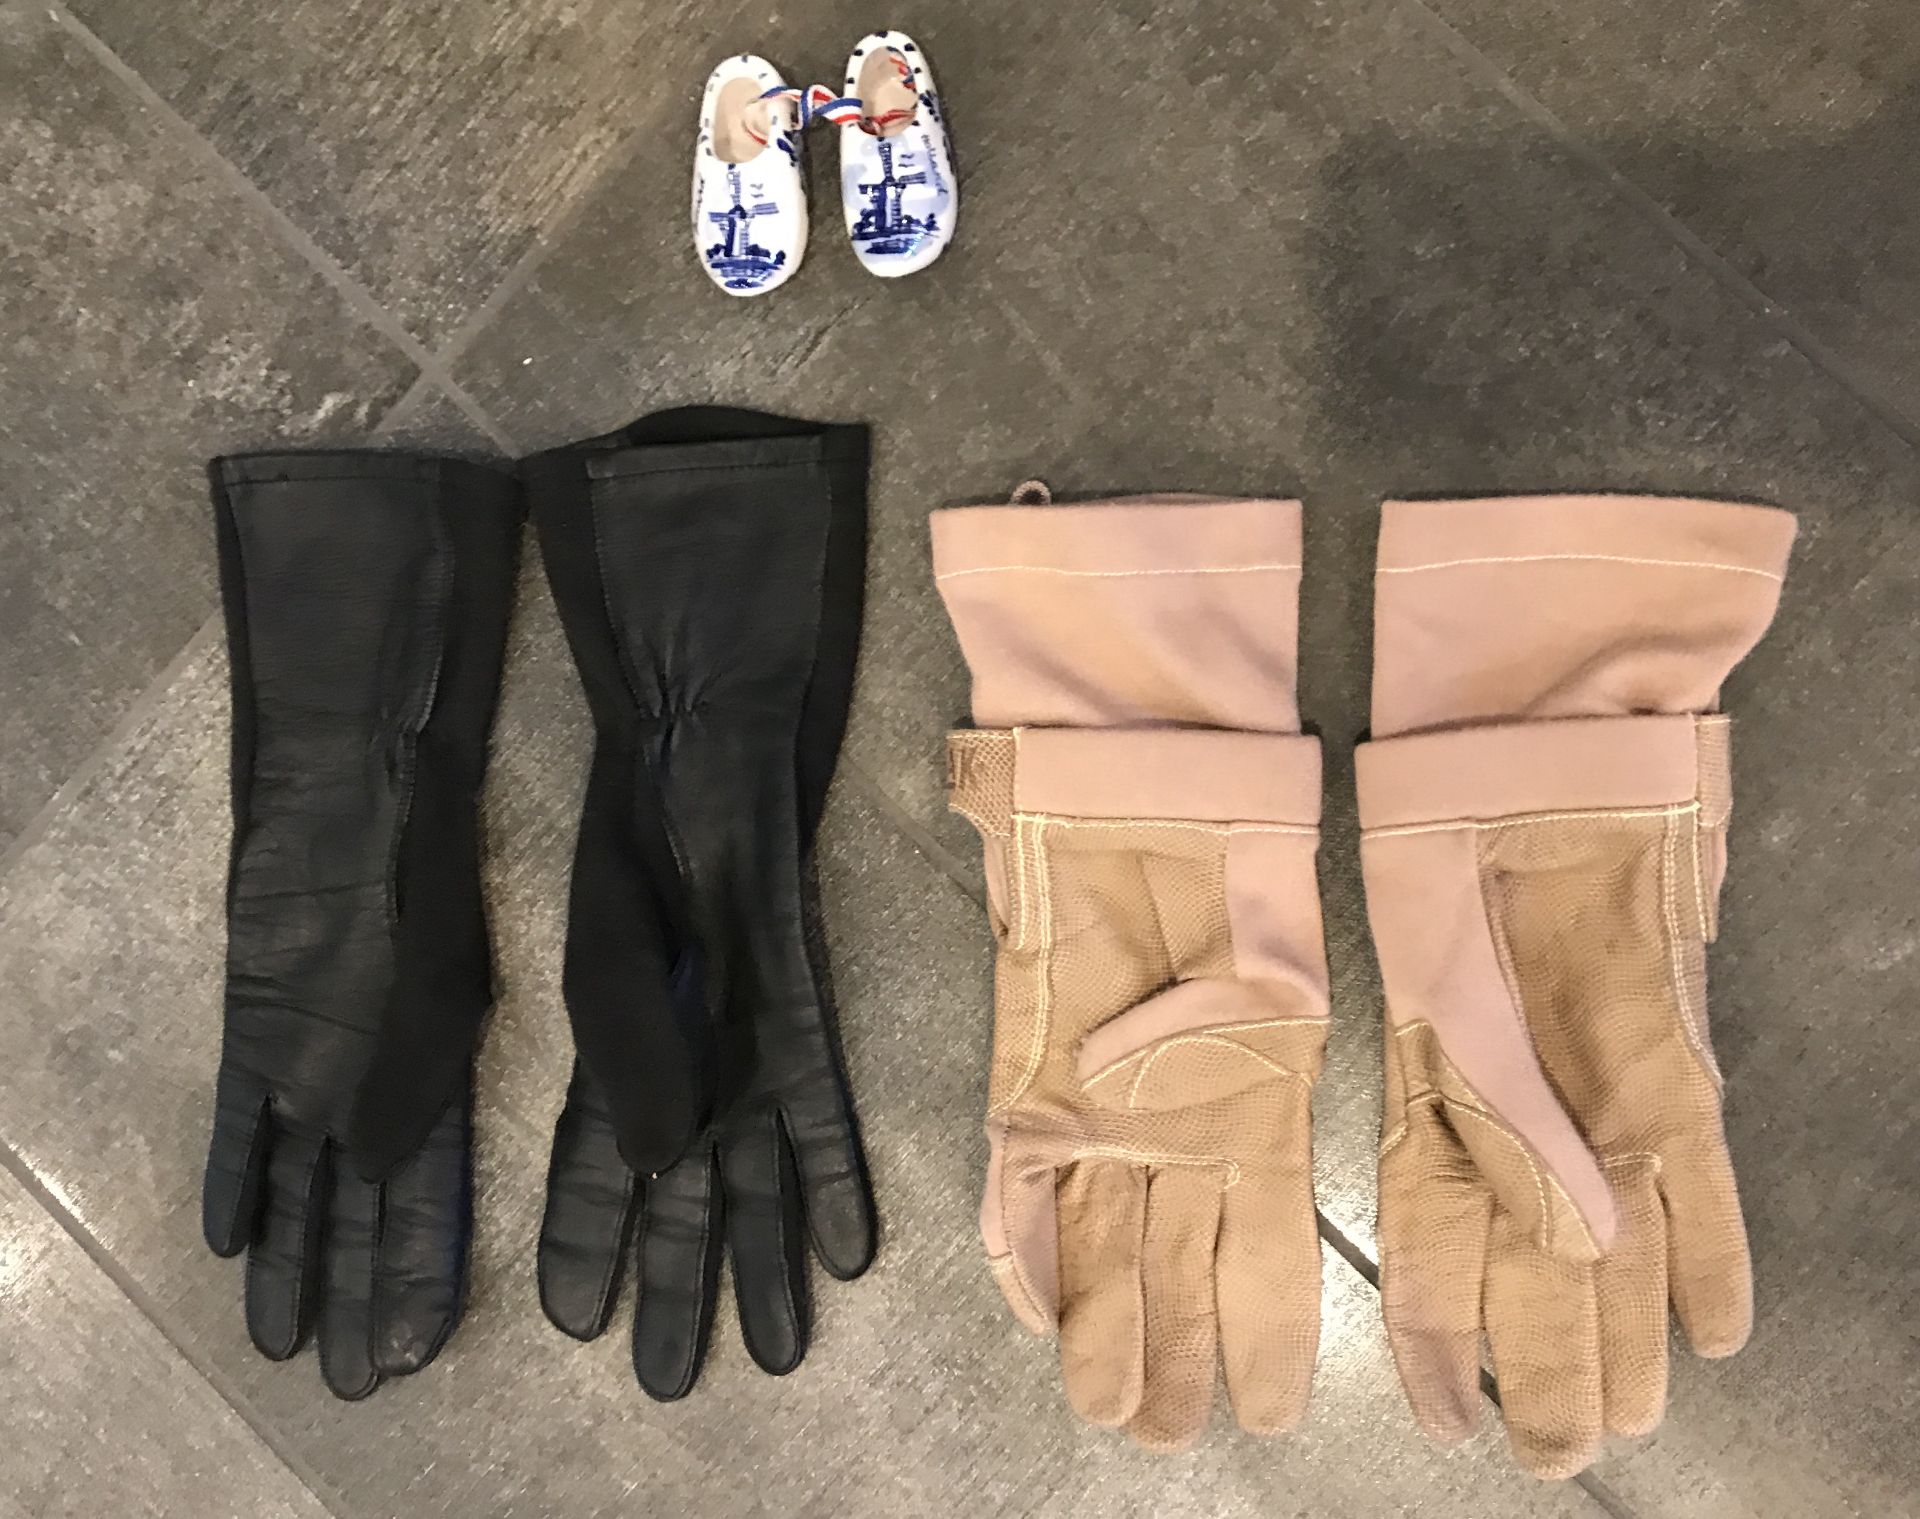 LOT OF BLACK LEATHER MILITARY GLOVES PAIR OF TAN LEATHER MILITARY GLOVES AND PAIR OF SOUVENIR SHOES